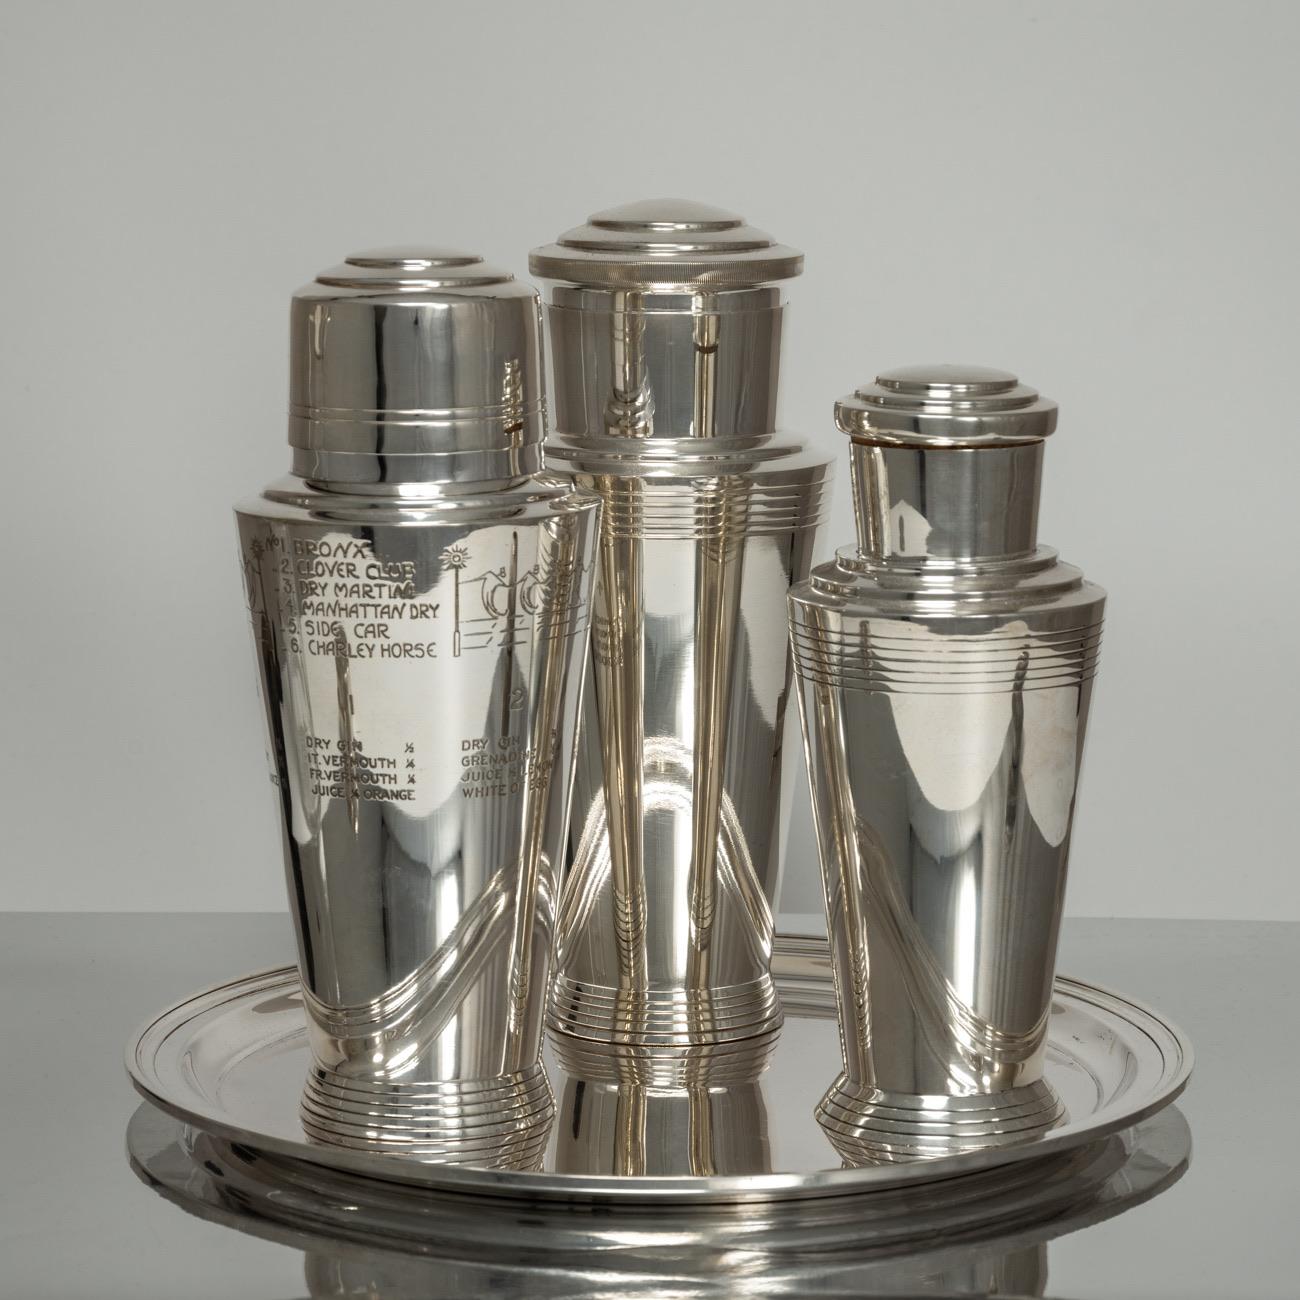 Mid-20th Century Sterling Silver Cocktail Shaker Designed by Keith Murray, Hallmarked, 1932 For Sale